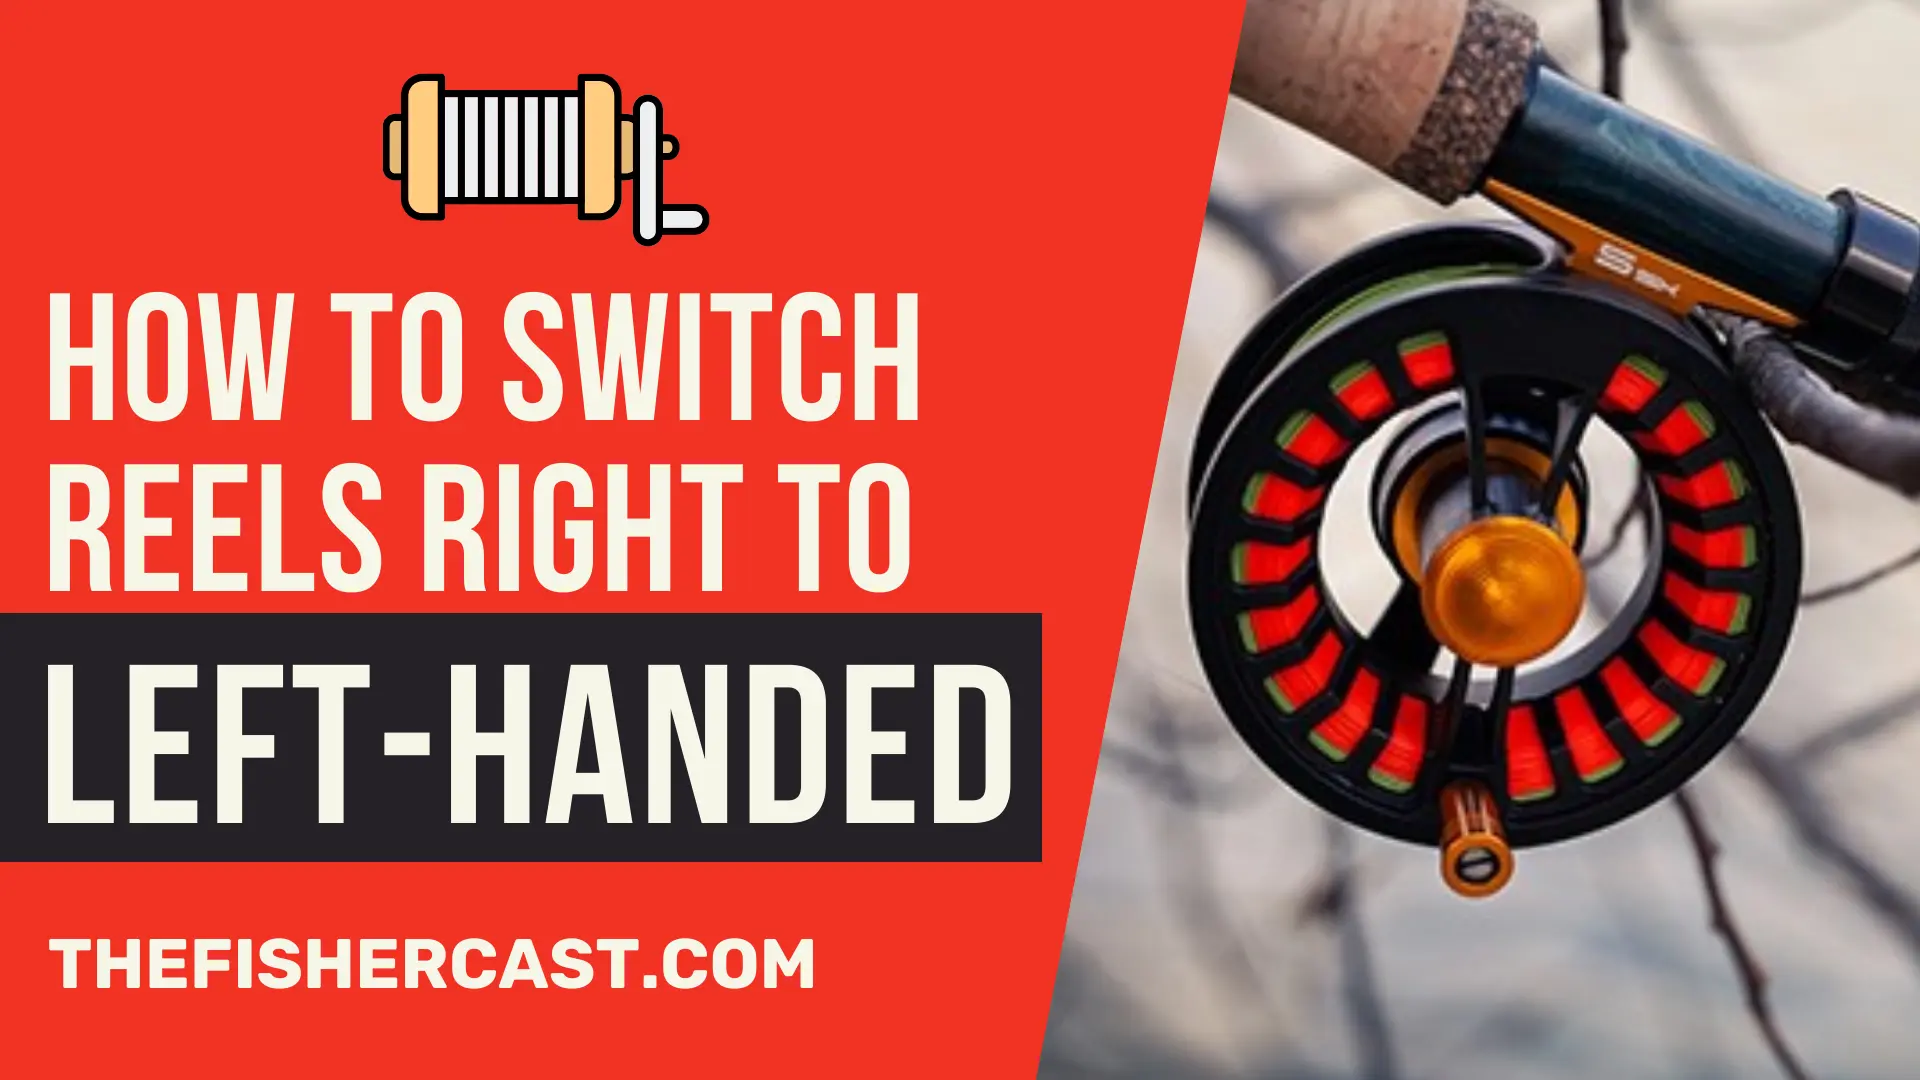 How to Switch Reels Right to left-handed